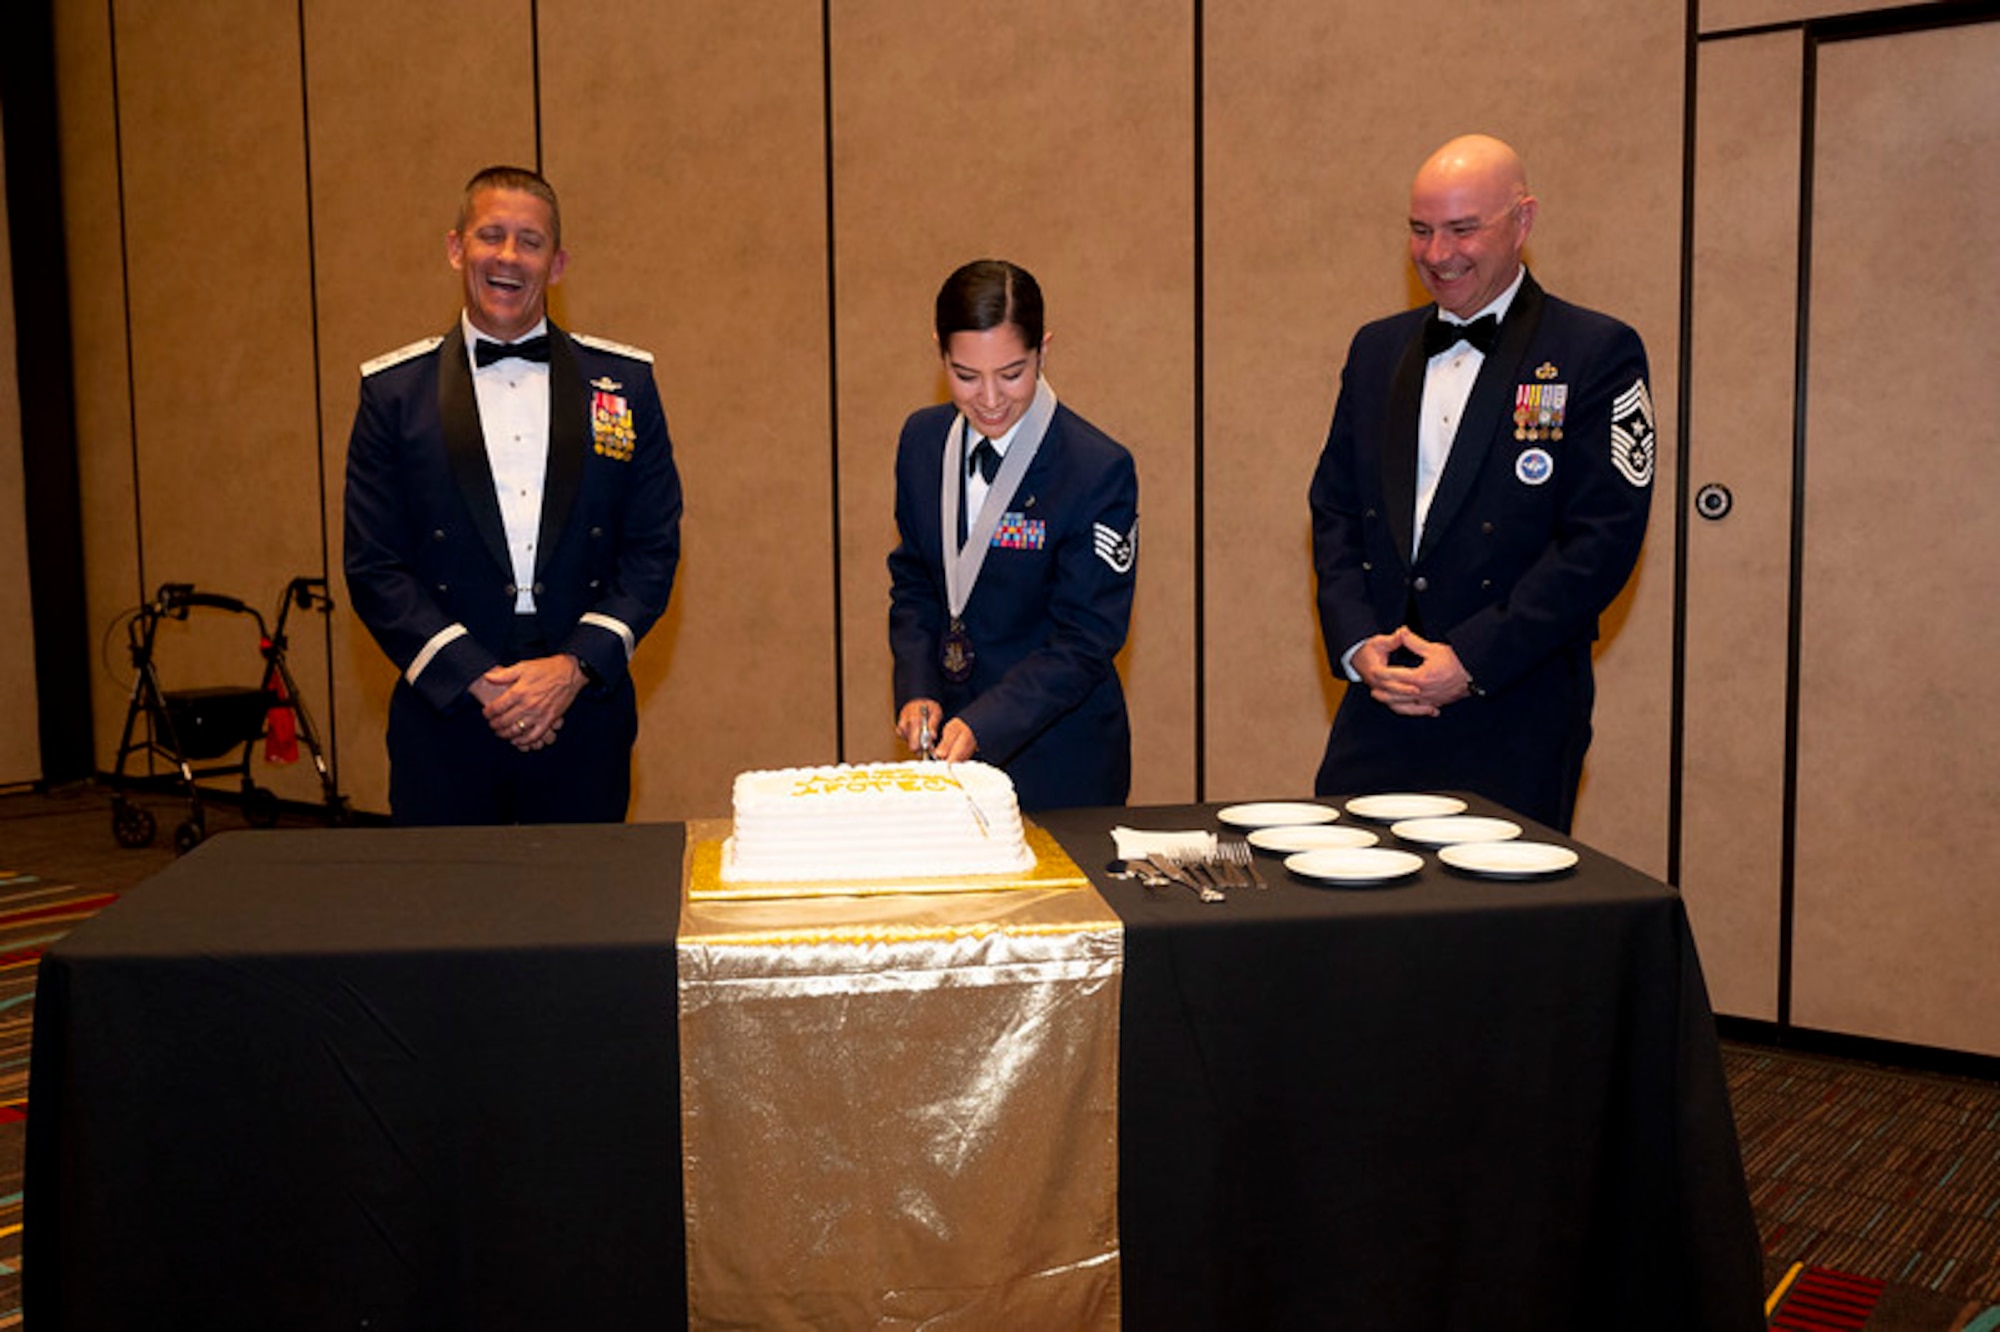 SSgt. Abrielle Maes (Center) cuts the cake for the Air Force Operational Test and Evaluation Center 50th Anniversary Celebration with the AFOTEC Commander Maj. Gen. Trey Rawls (left) and AFOTEC Command Chief CMSgt. John Burgess (right). Tradition is for the youngest member of an organization to cut the ceremonial cake.